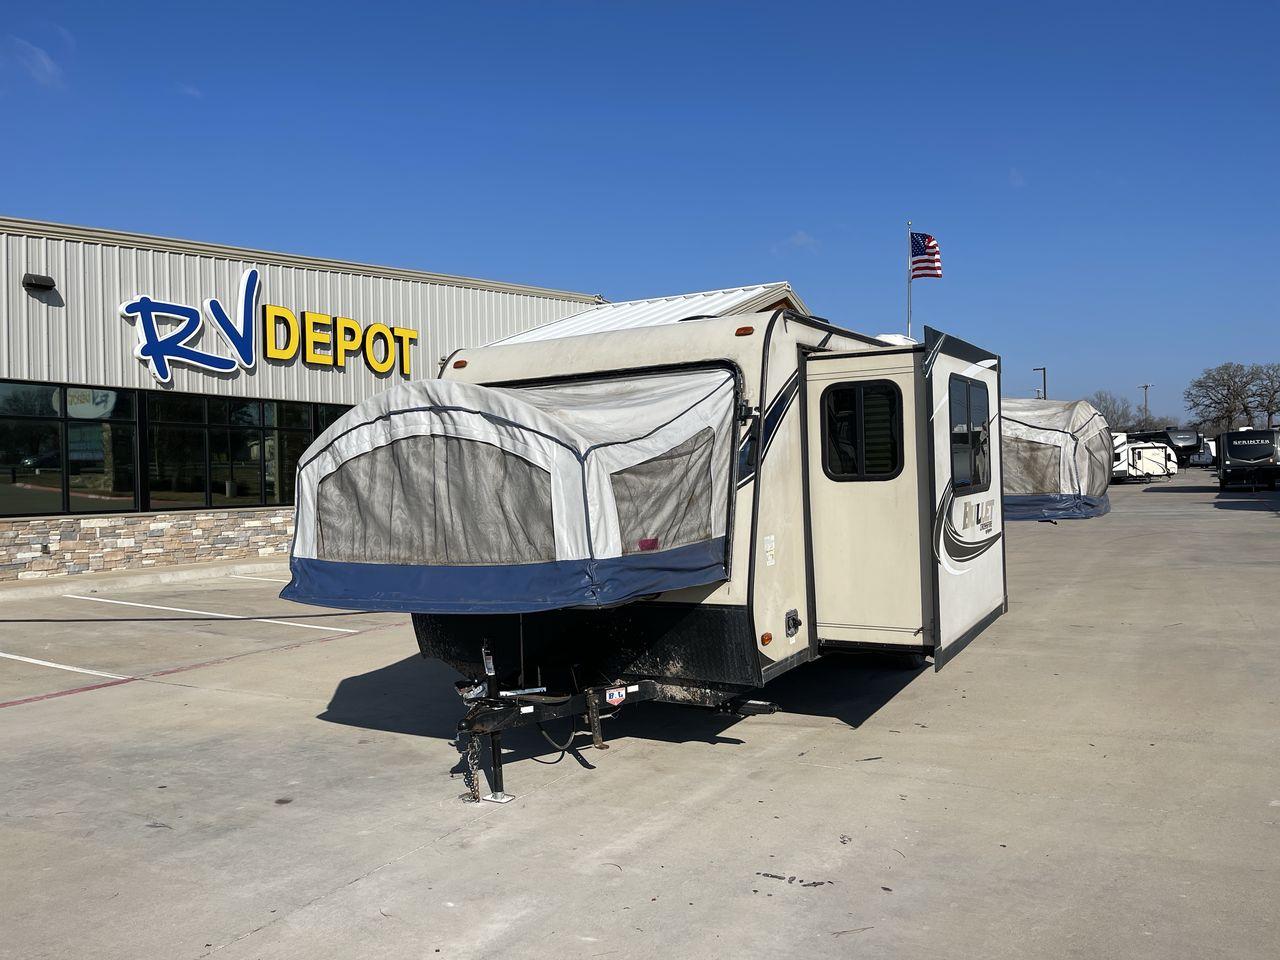 2018 BULLET CROSSFIRE 2190EX (4YDT21923JT) , Length: 25.08 ft. | Dry Weight: 4,410 lbs. | Gross Weight: 6,300 lbs. | Slides: 1 transmission, located at 4319 N Main Street, Cleburne, TX, 76033, (817) 221-0660, 32.435829, -97.384178 - The 2018 Bullet Crossfire 2190EX is a lightweight vacation trailer that can be used for a variety of activities. This trailer is 25.08 feet long and weighs 4,410 pounds dry. It is easy to pull and move, which makes it great for both short trips and longer vacations. Even though it's small, the Cross - Photo #0